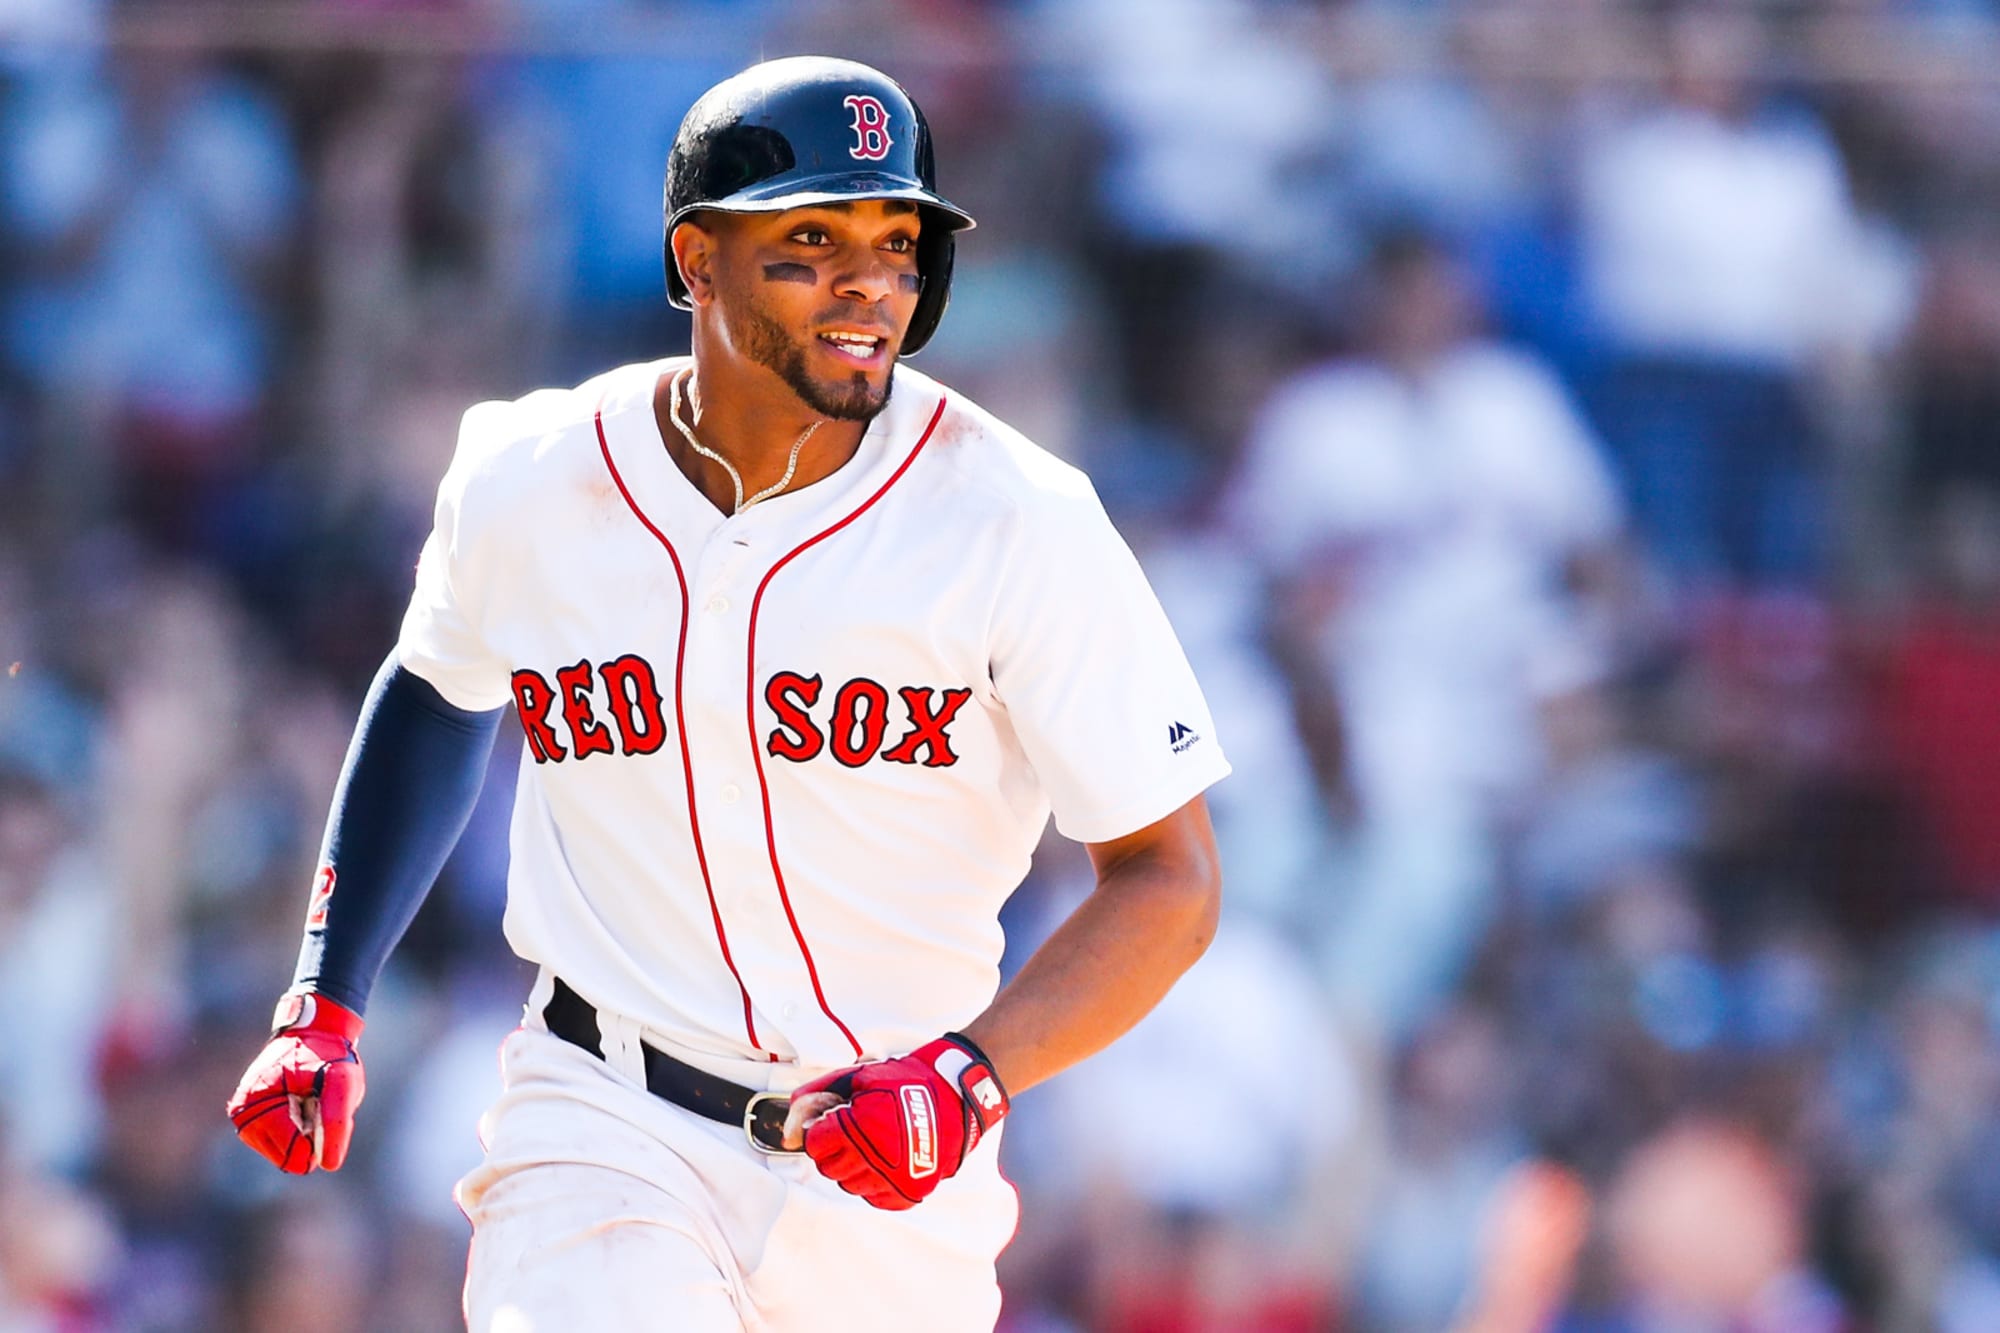 Boston Red Sox shortstop Xander Bogaerts emerging as clubhouse leader